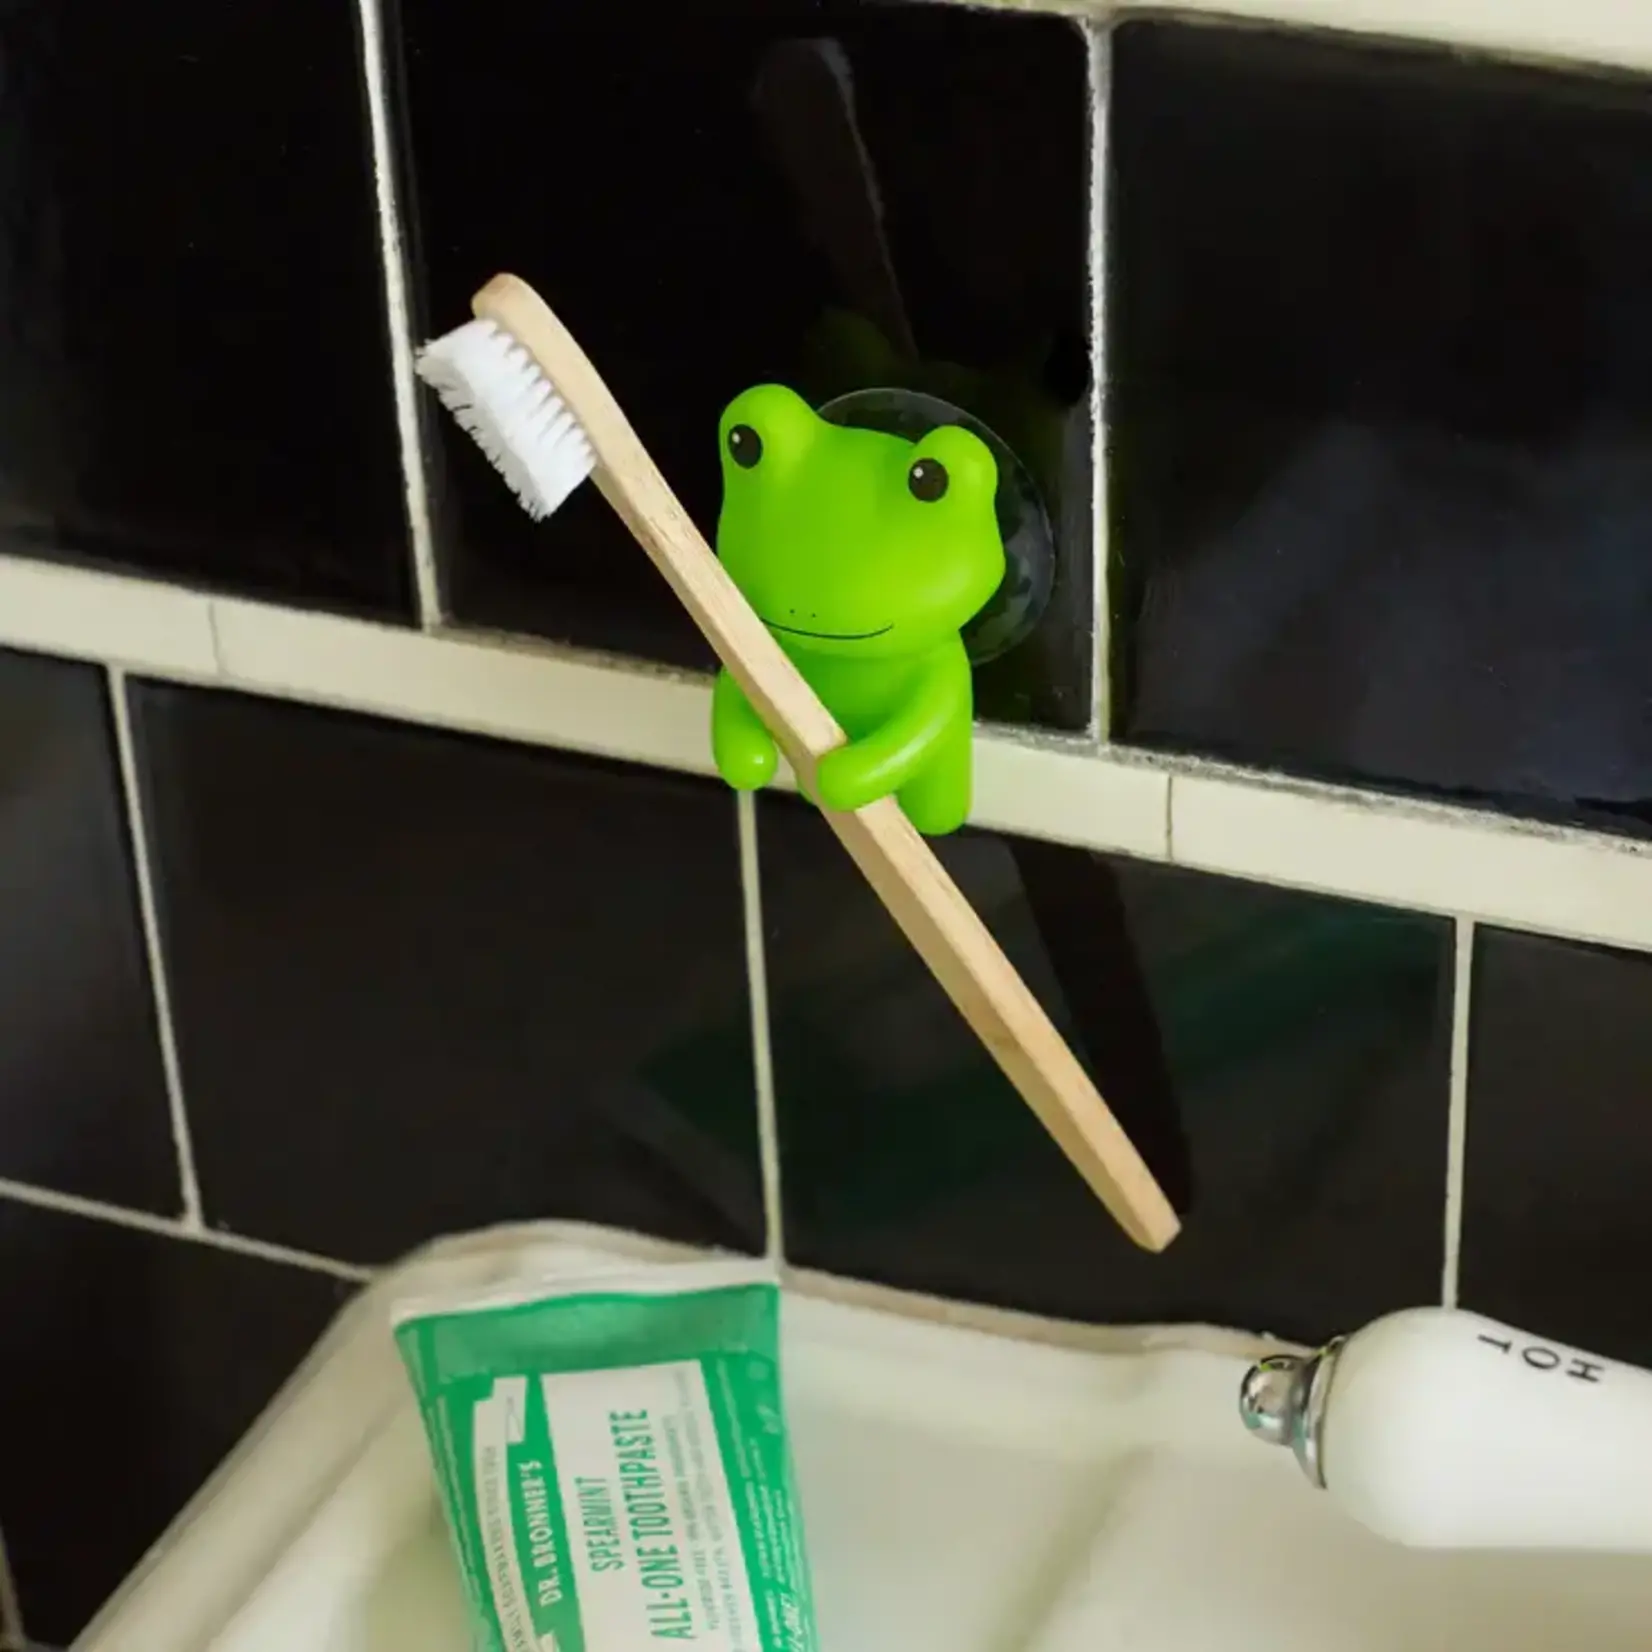 Toothbrush Holder - Frog HH58